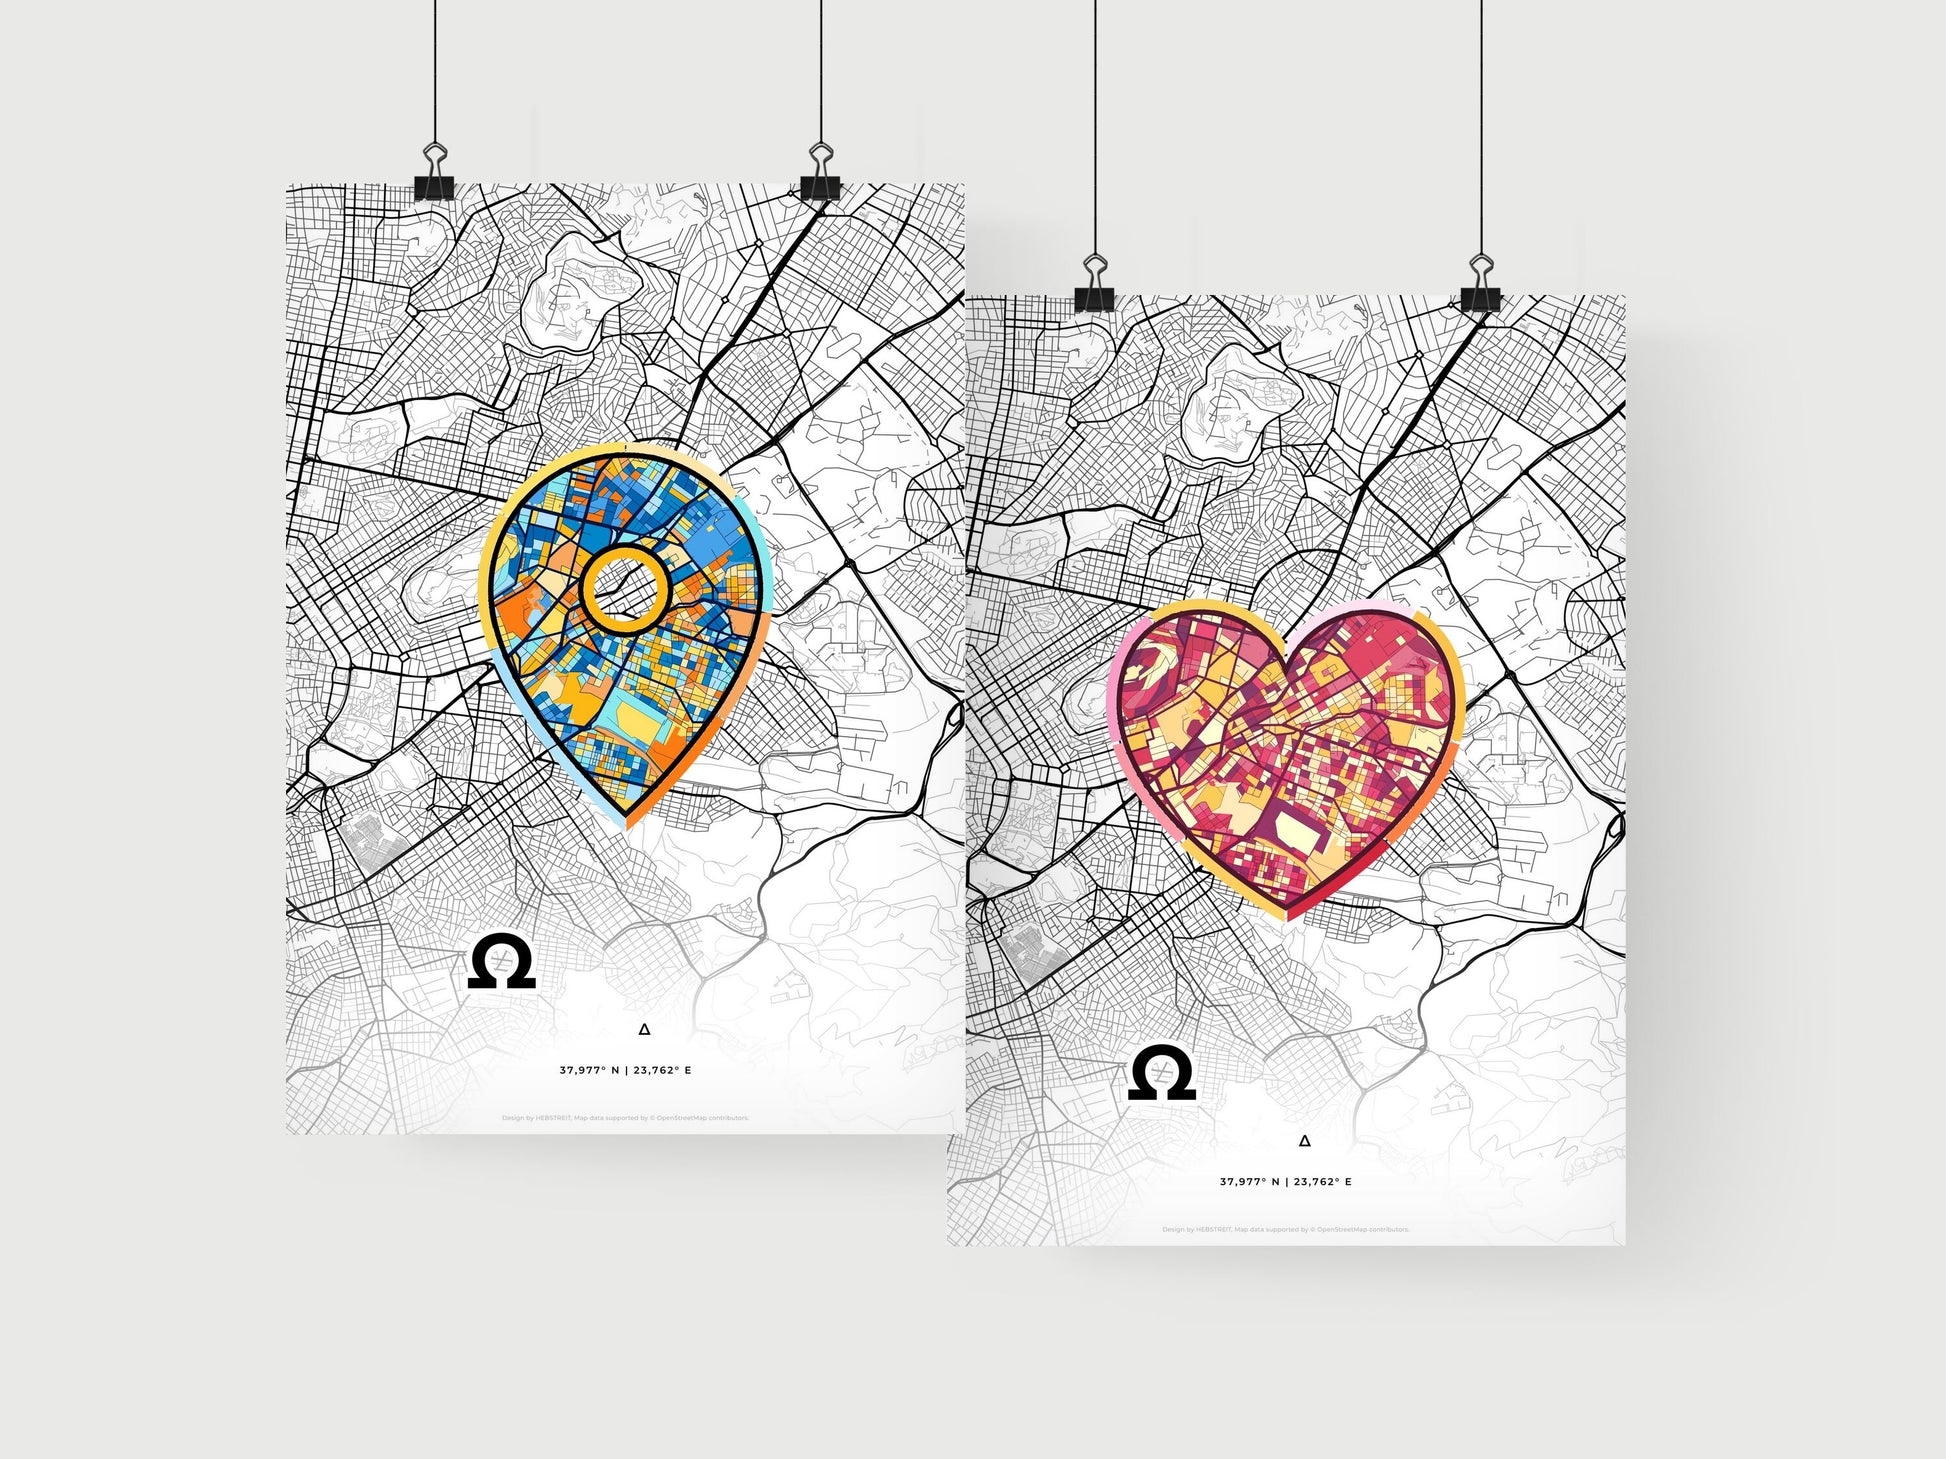 ZOGRAFOU GREECE minimal art map with a colorful icon. Where it all began, Couple map gift.